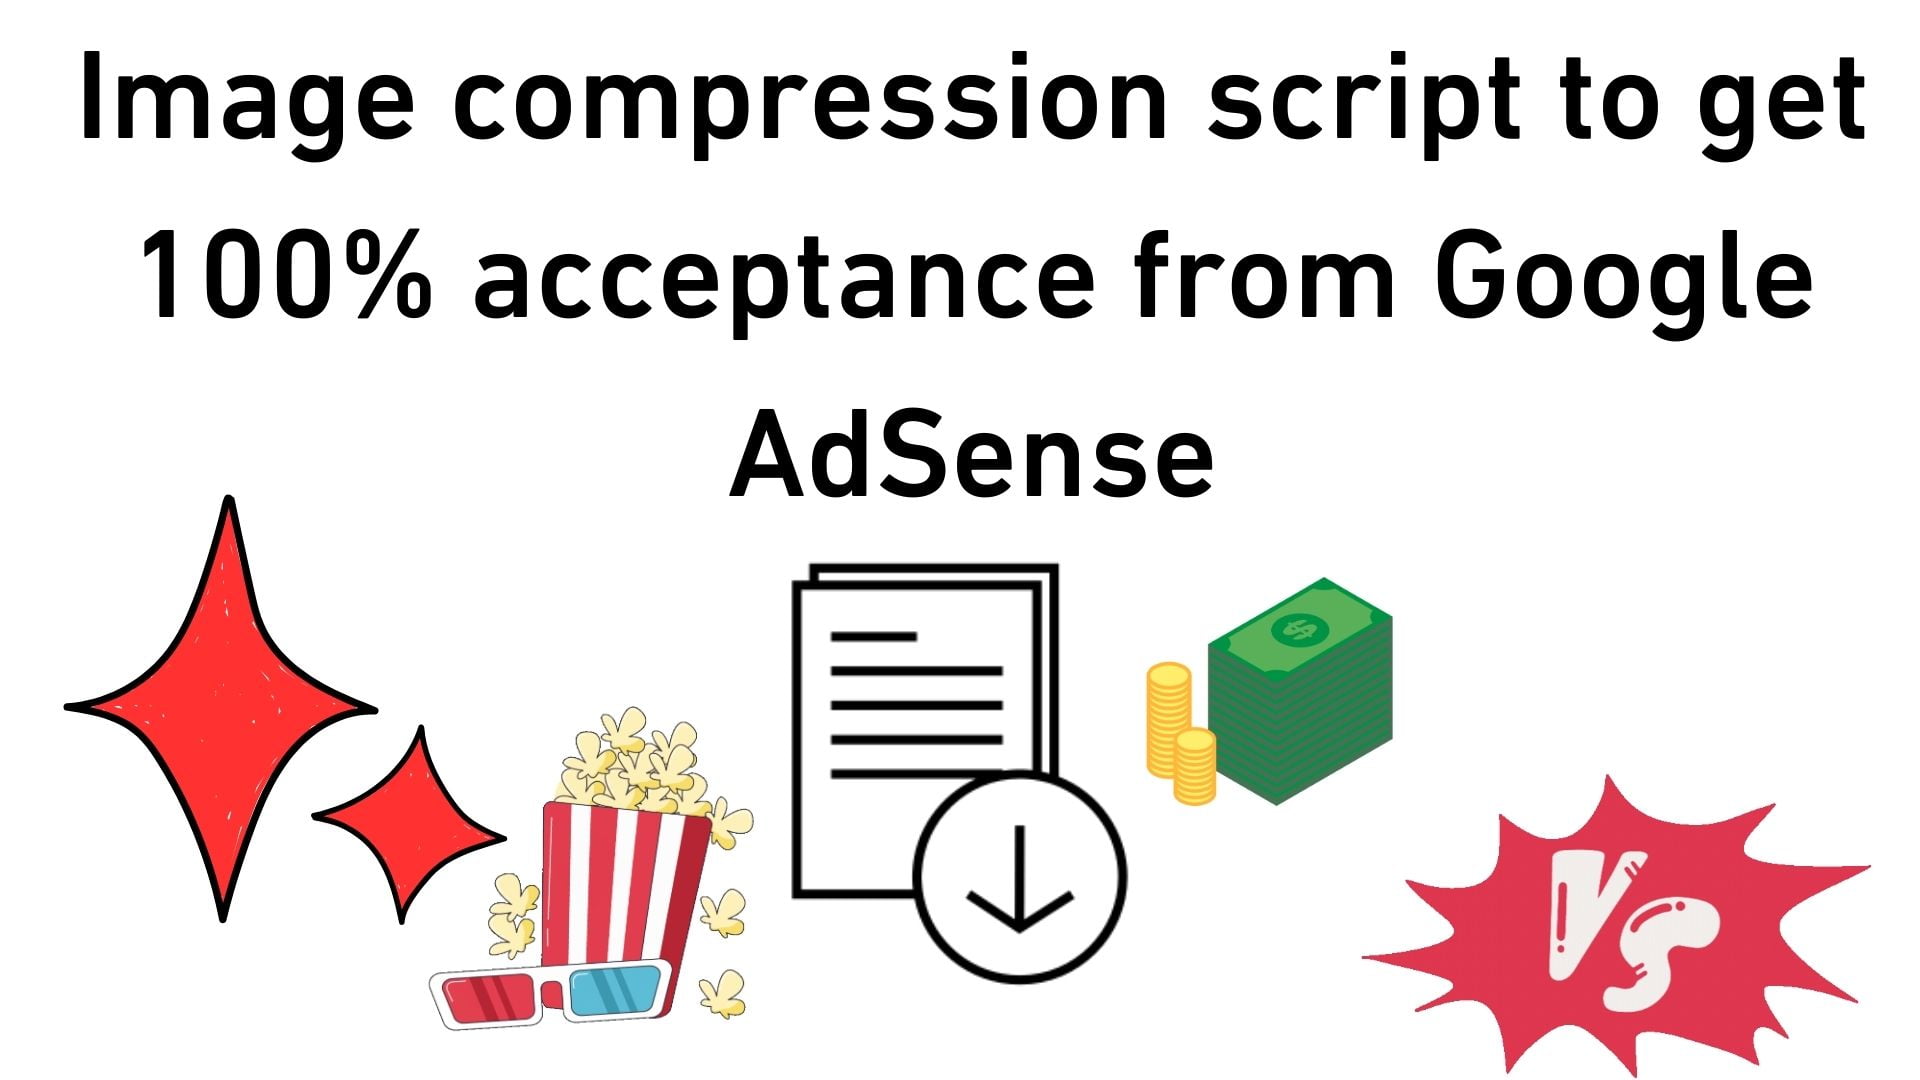 Image Compression Script To Get 100% Acceptance From Google Adsense